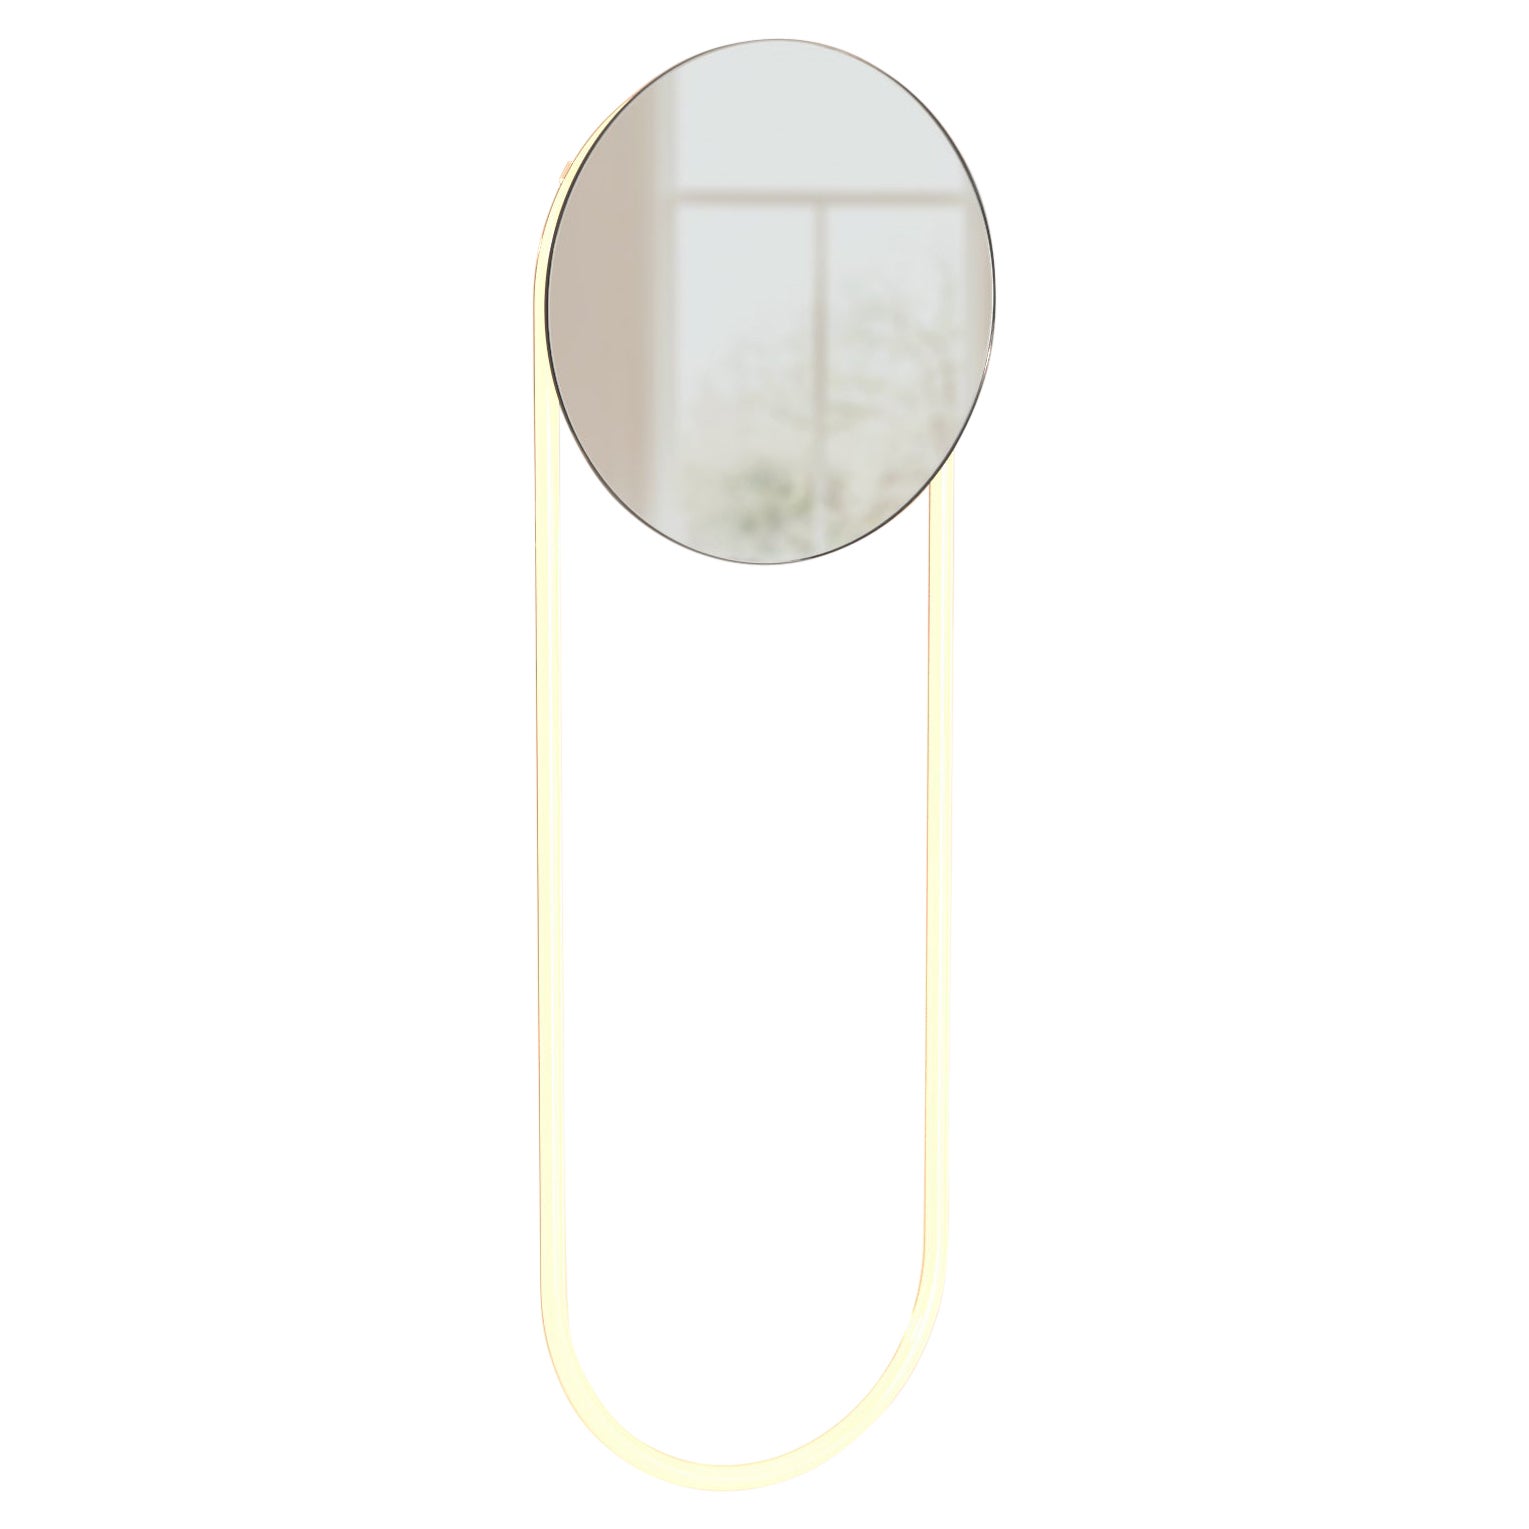 Ra Wall Short Mirror Hand Bent Neon Wall Sconce Lighting by Studio d'armes For Sale